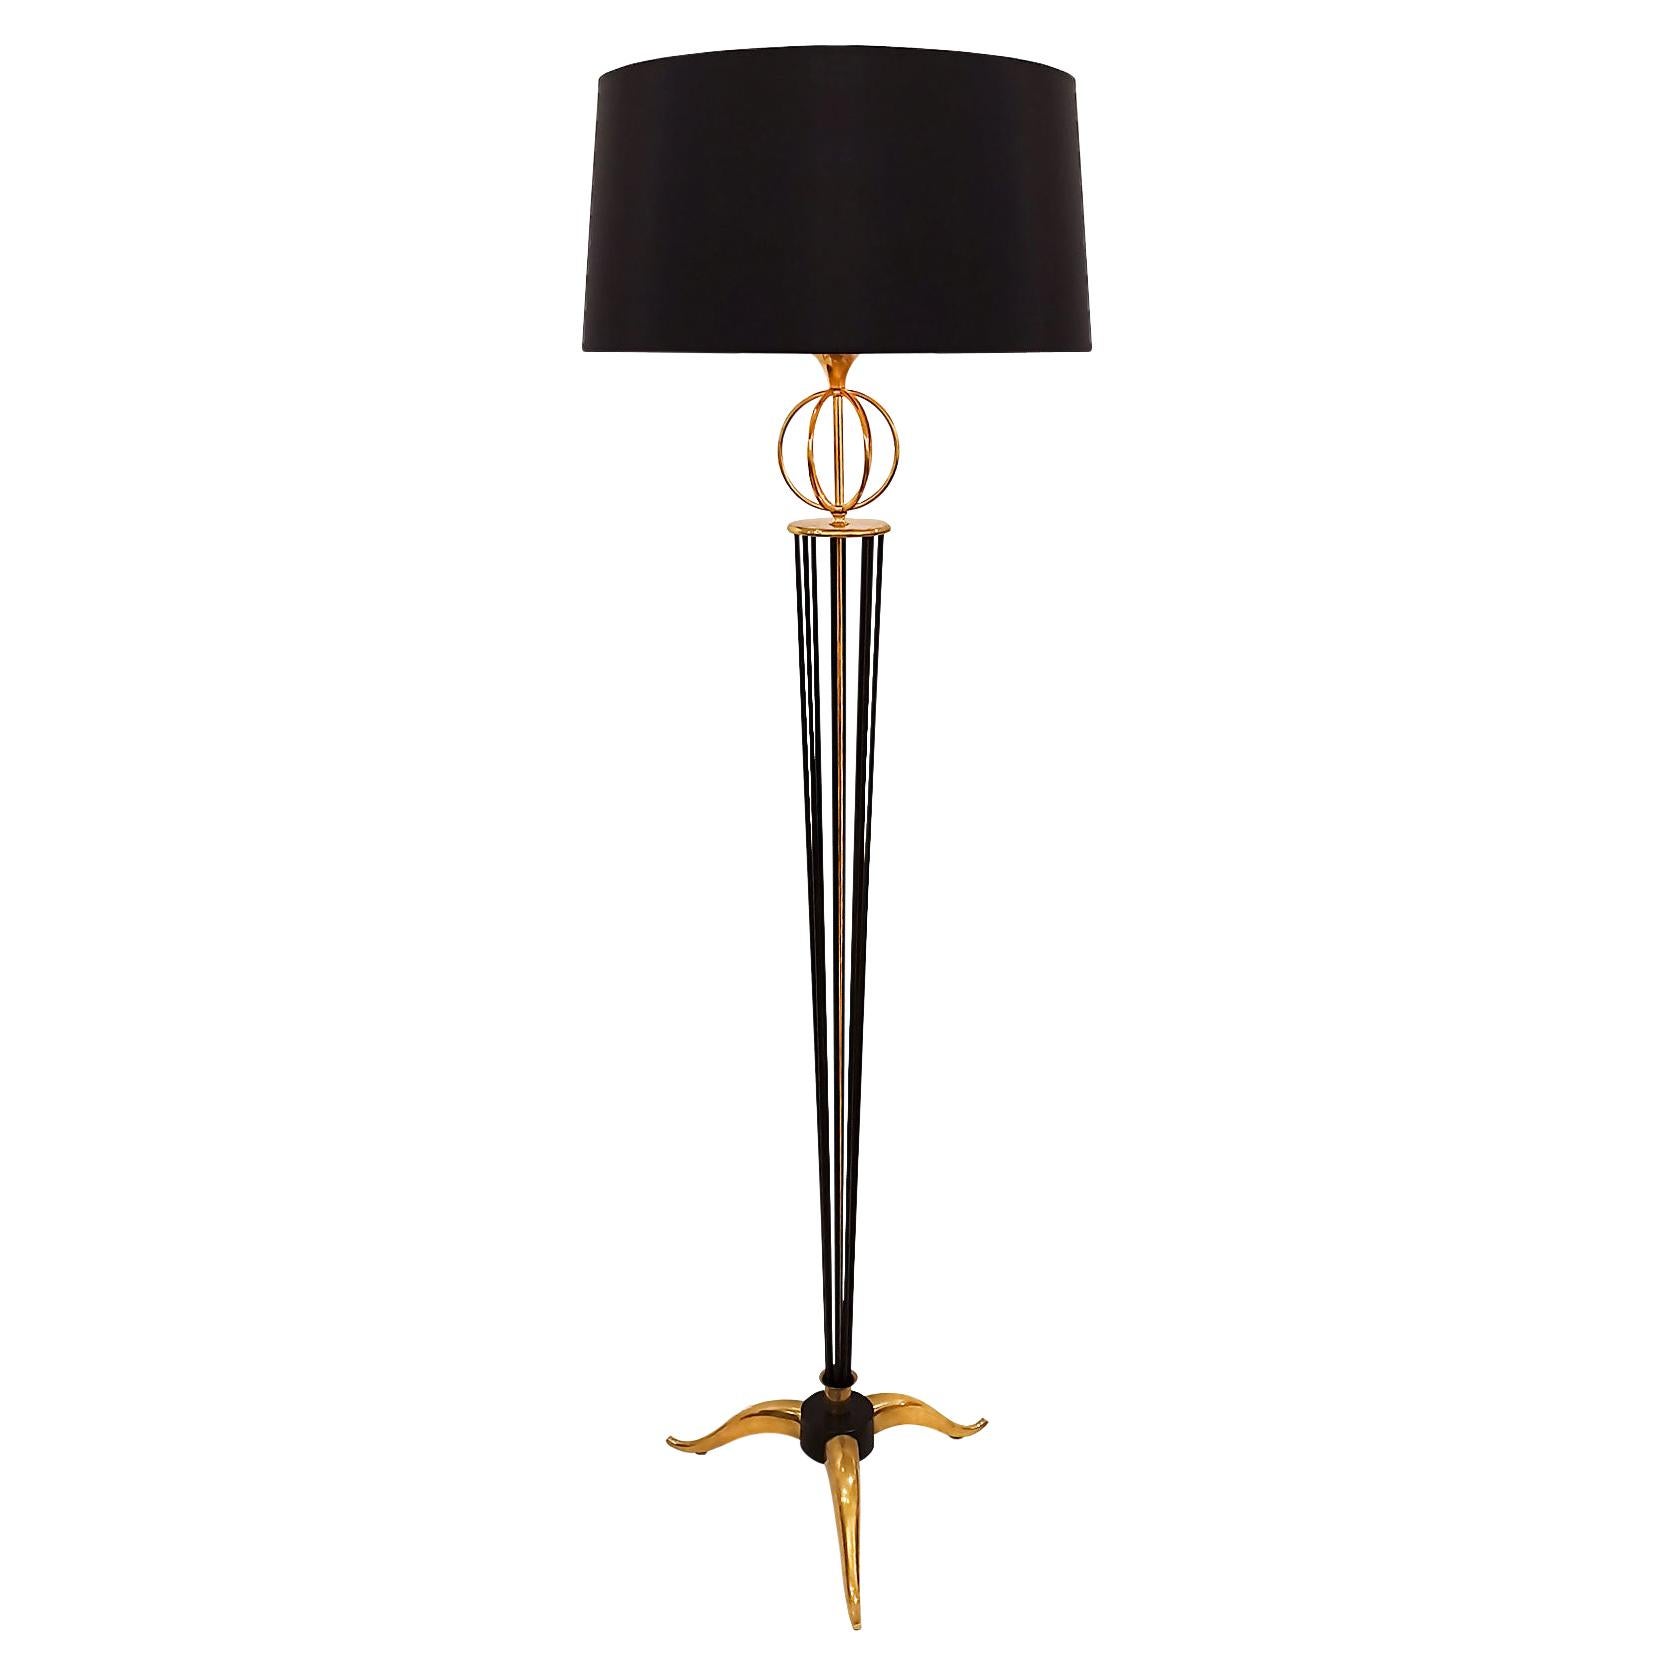 1955 Standing Lamp by Arlus, Lacquered Steel, Bronze and Black Silk, France